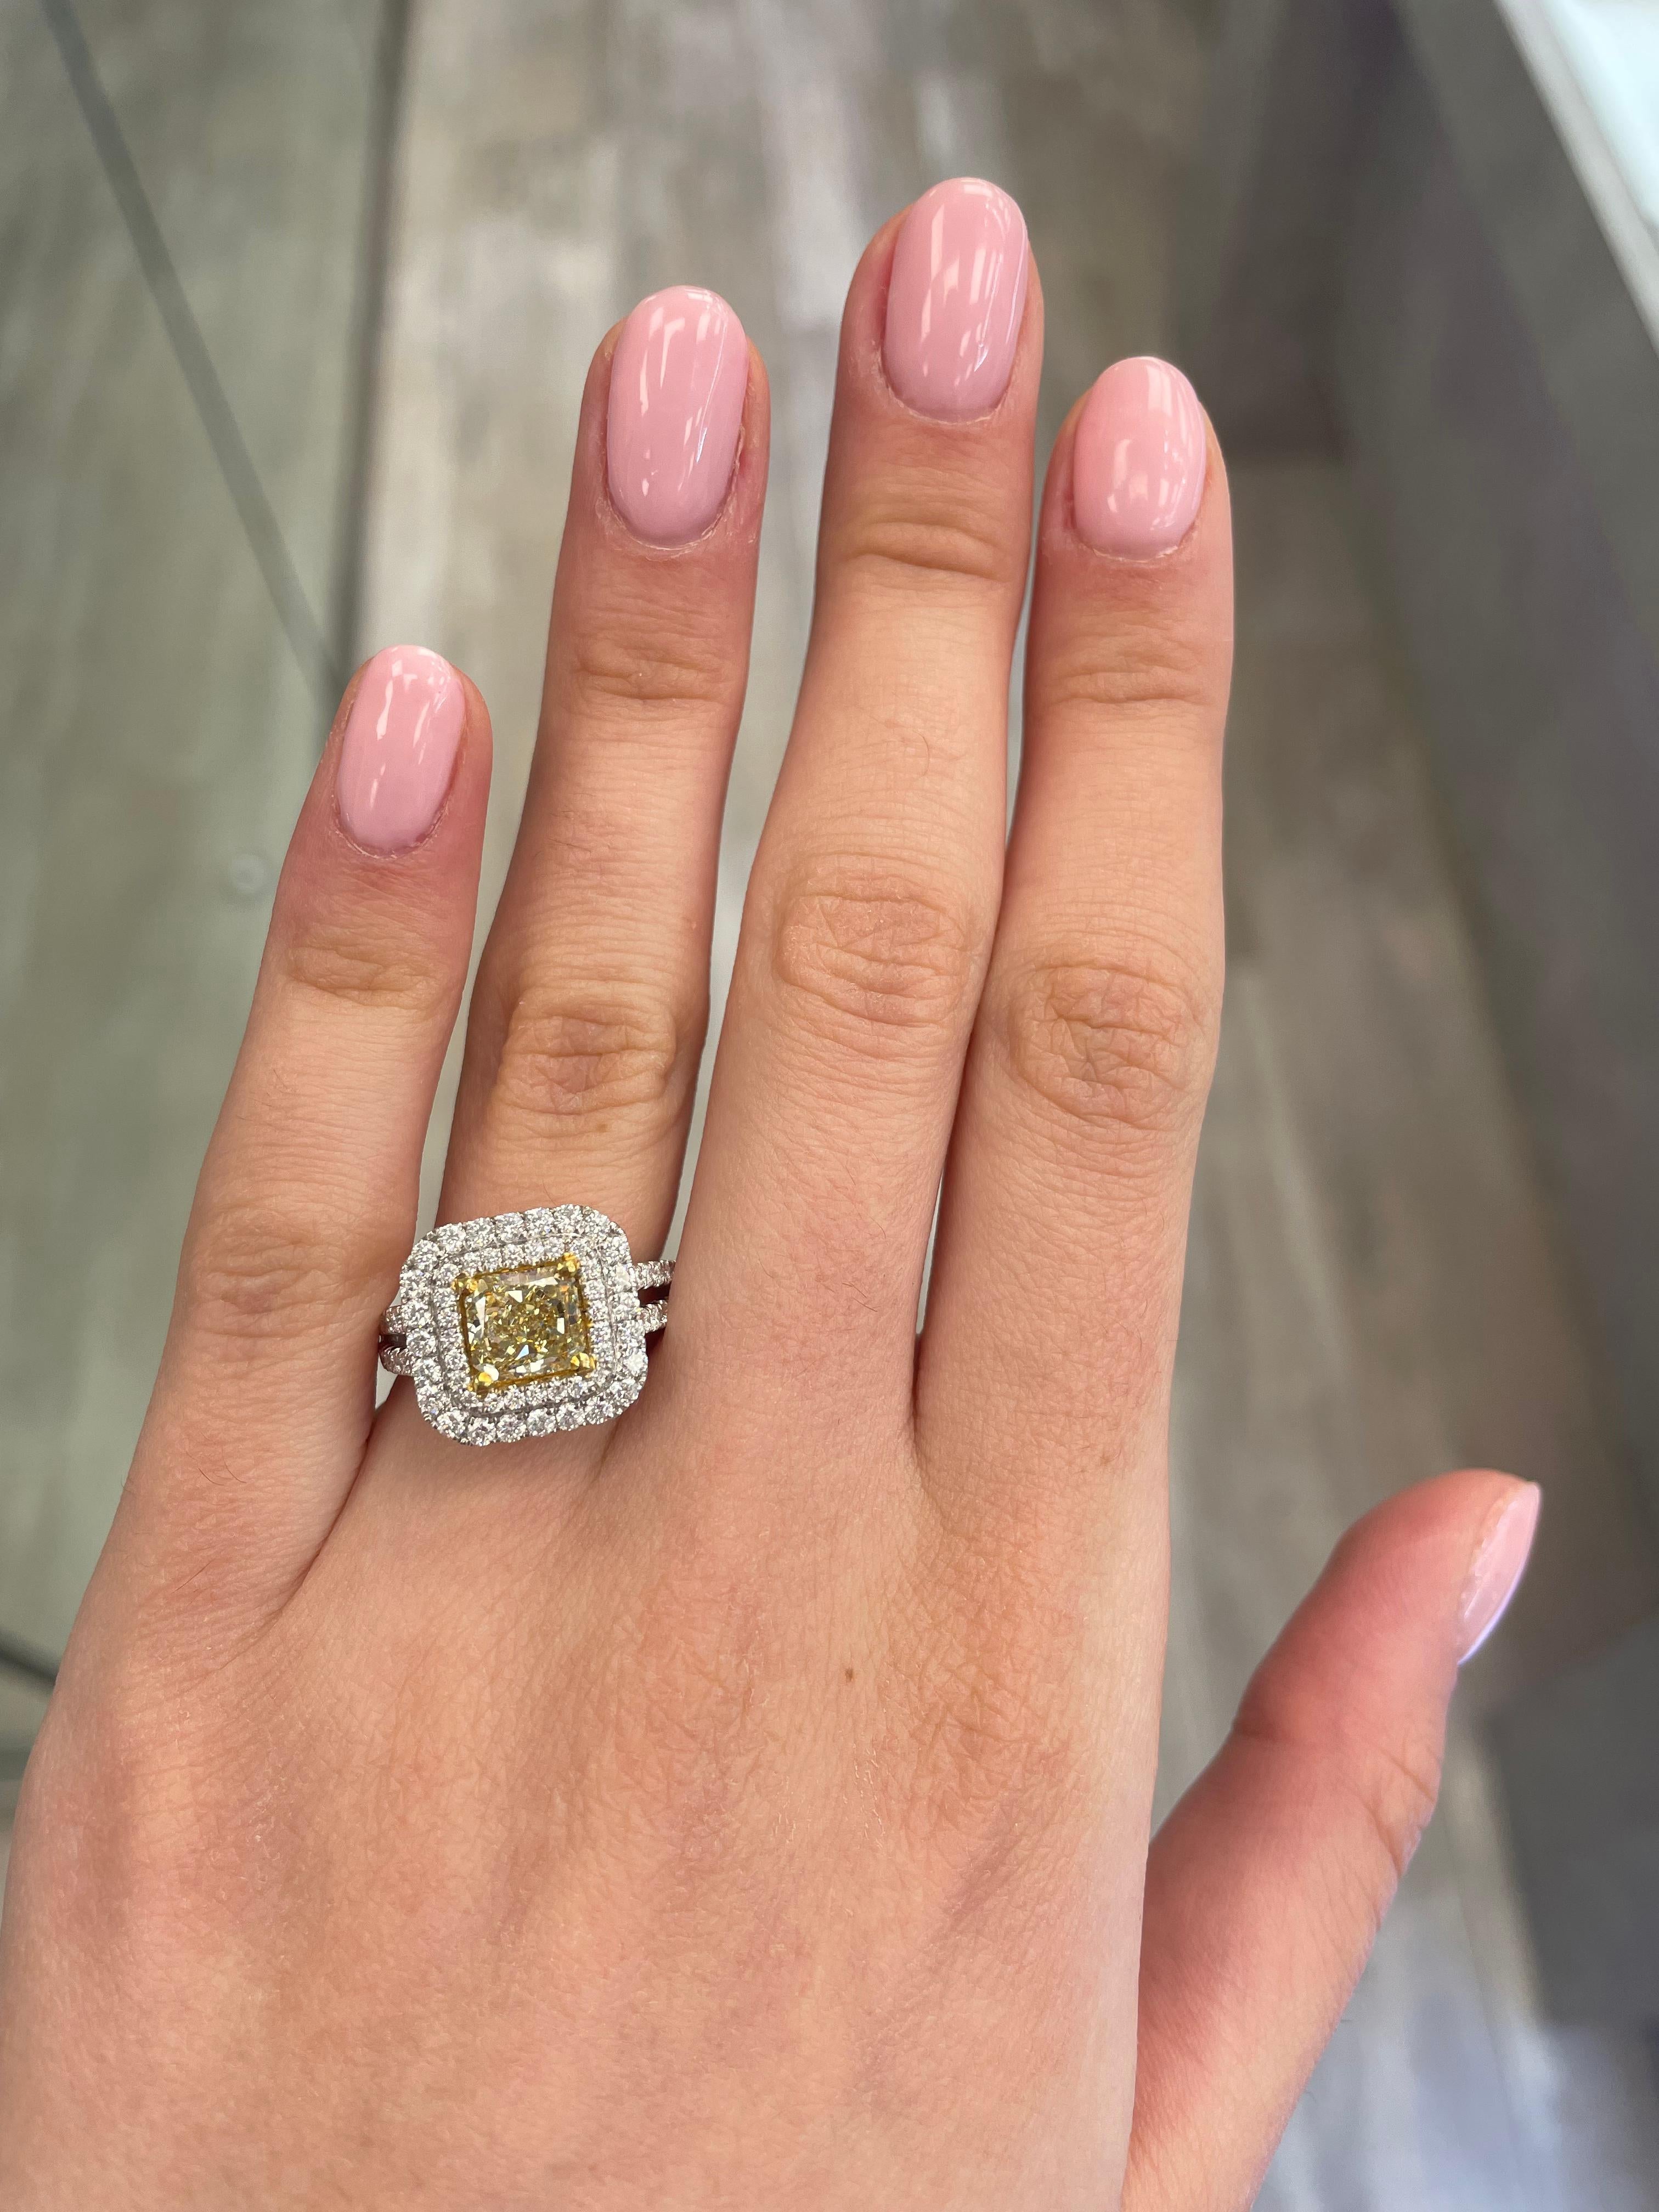 Stunning modern EGL certified fancy intense yellow diamond double halo ring, two-tone 18k yellow and white gold, split shank. By Alexander Beverly Hills
2.88 carats total diamond weight.
1.62 carat radiant cut Fancy Intense Yellow color and SI1